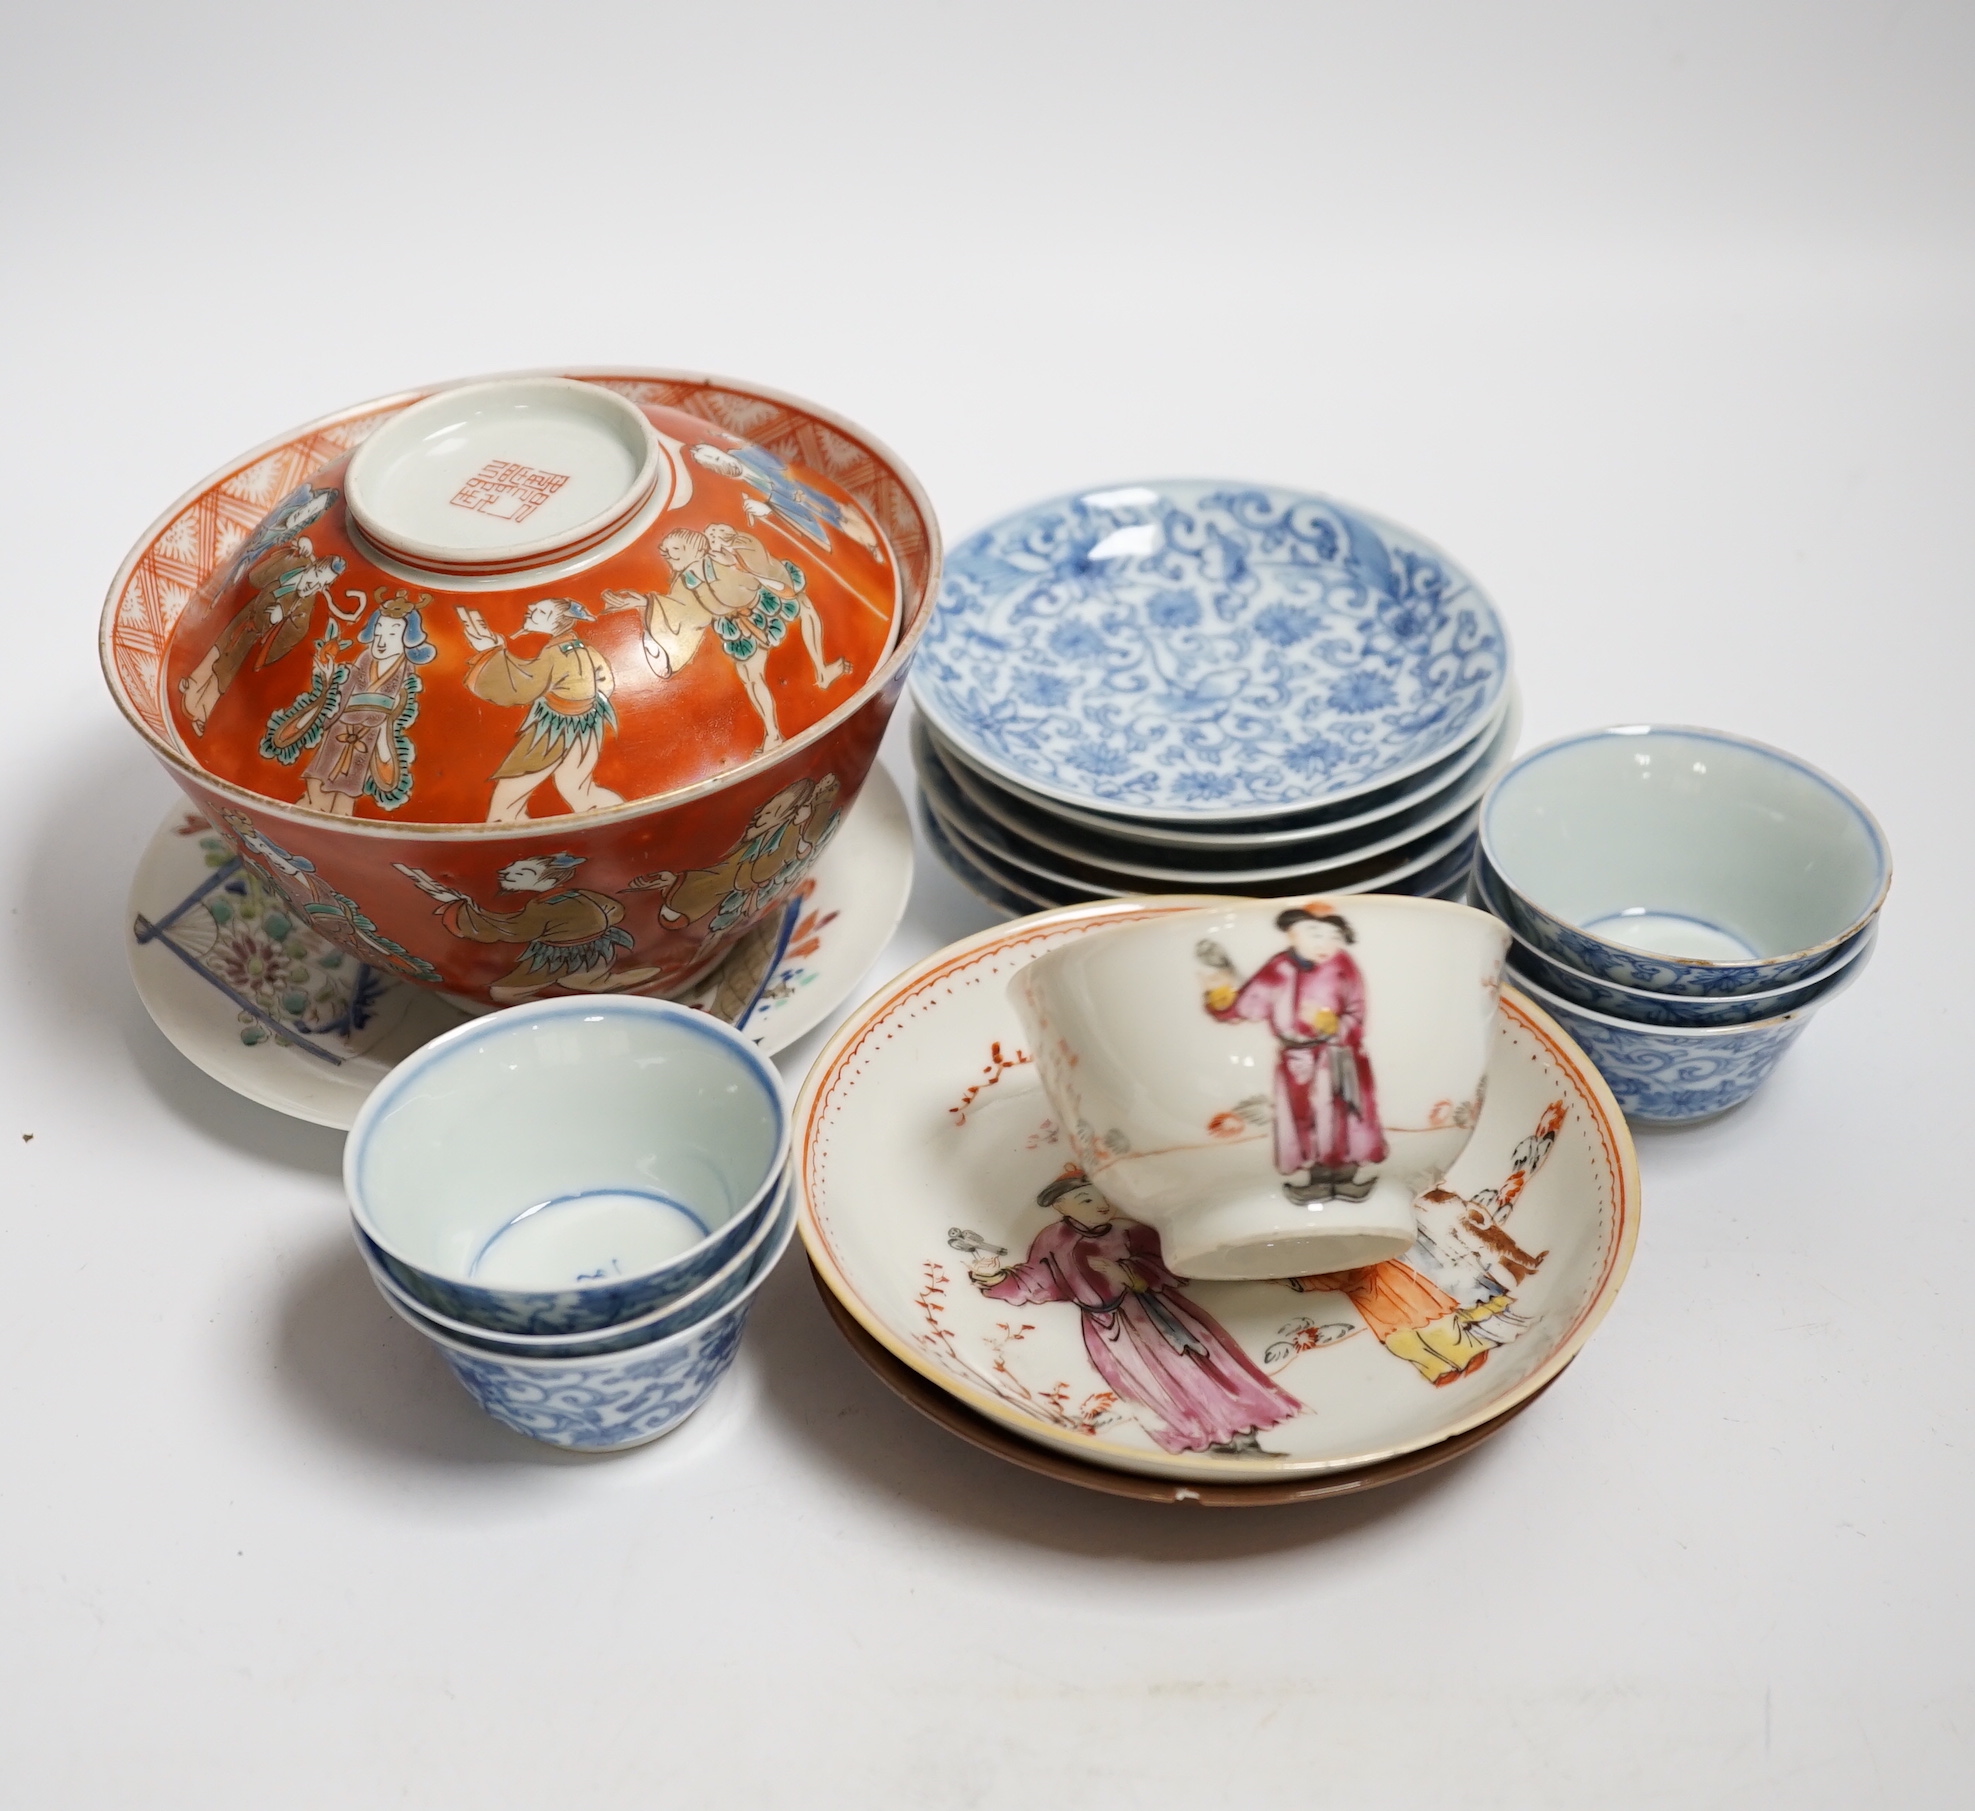 A set of six Chinese blue and white tea bowls and saucers, Kangxi period, a Chinese famille rose tea bowl and saucer, a Batavia ware saucer, both 18th century and Japanese ceramics